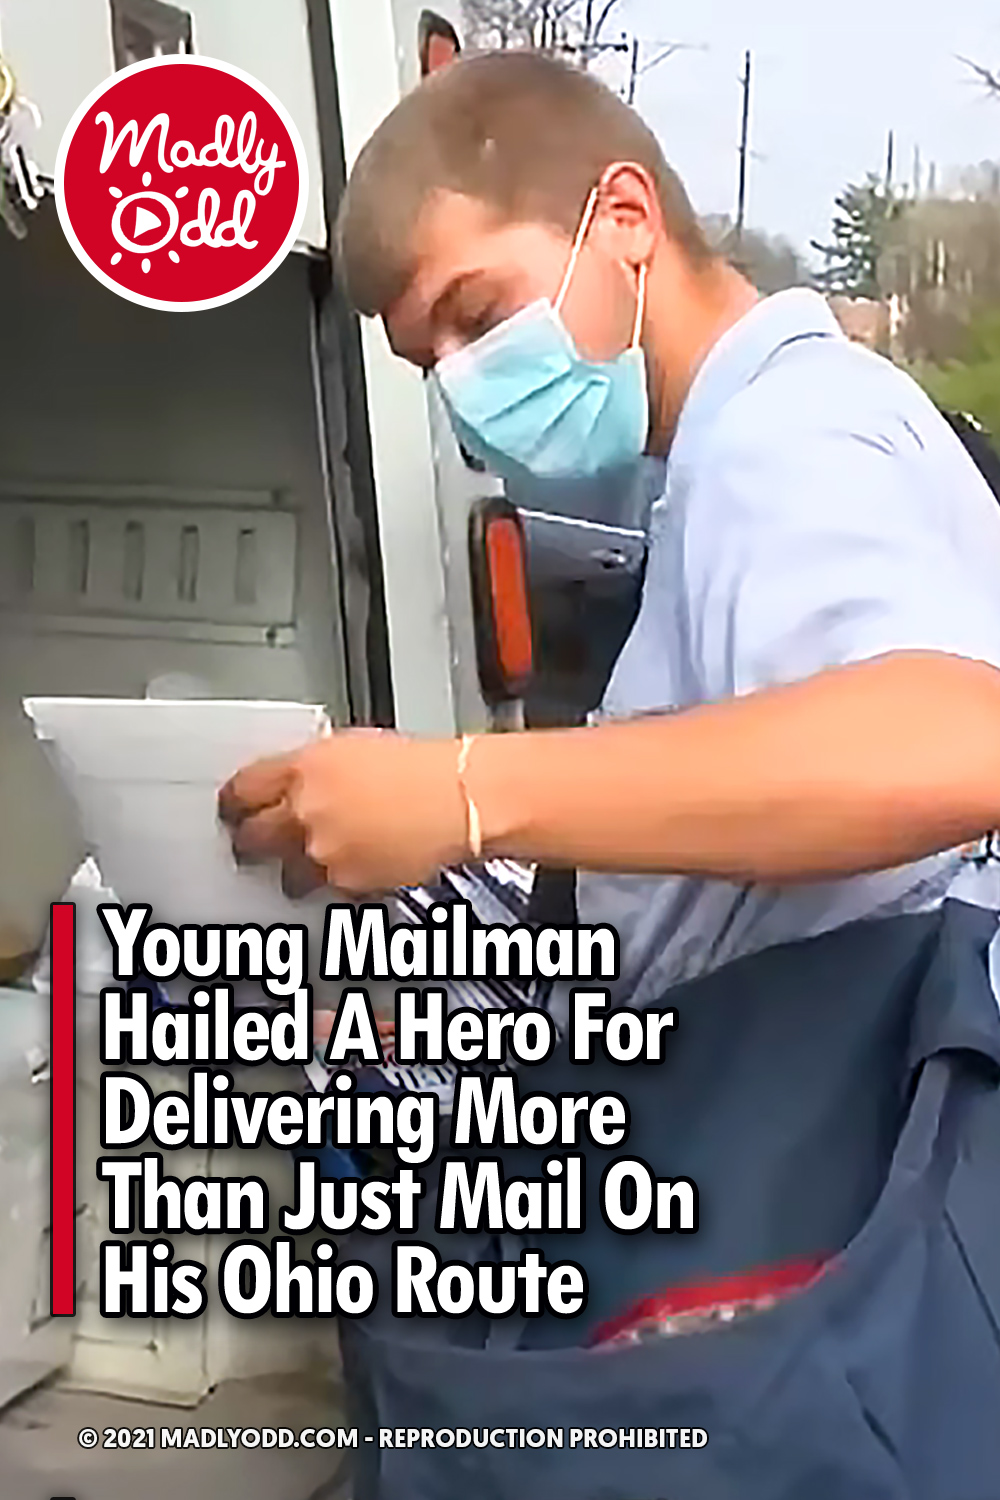 Young Mailman Hailed A Hero For Delivering More Than Just Mail On His Ohio Route